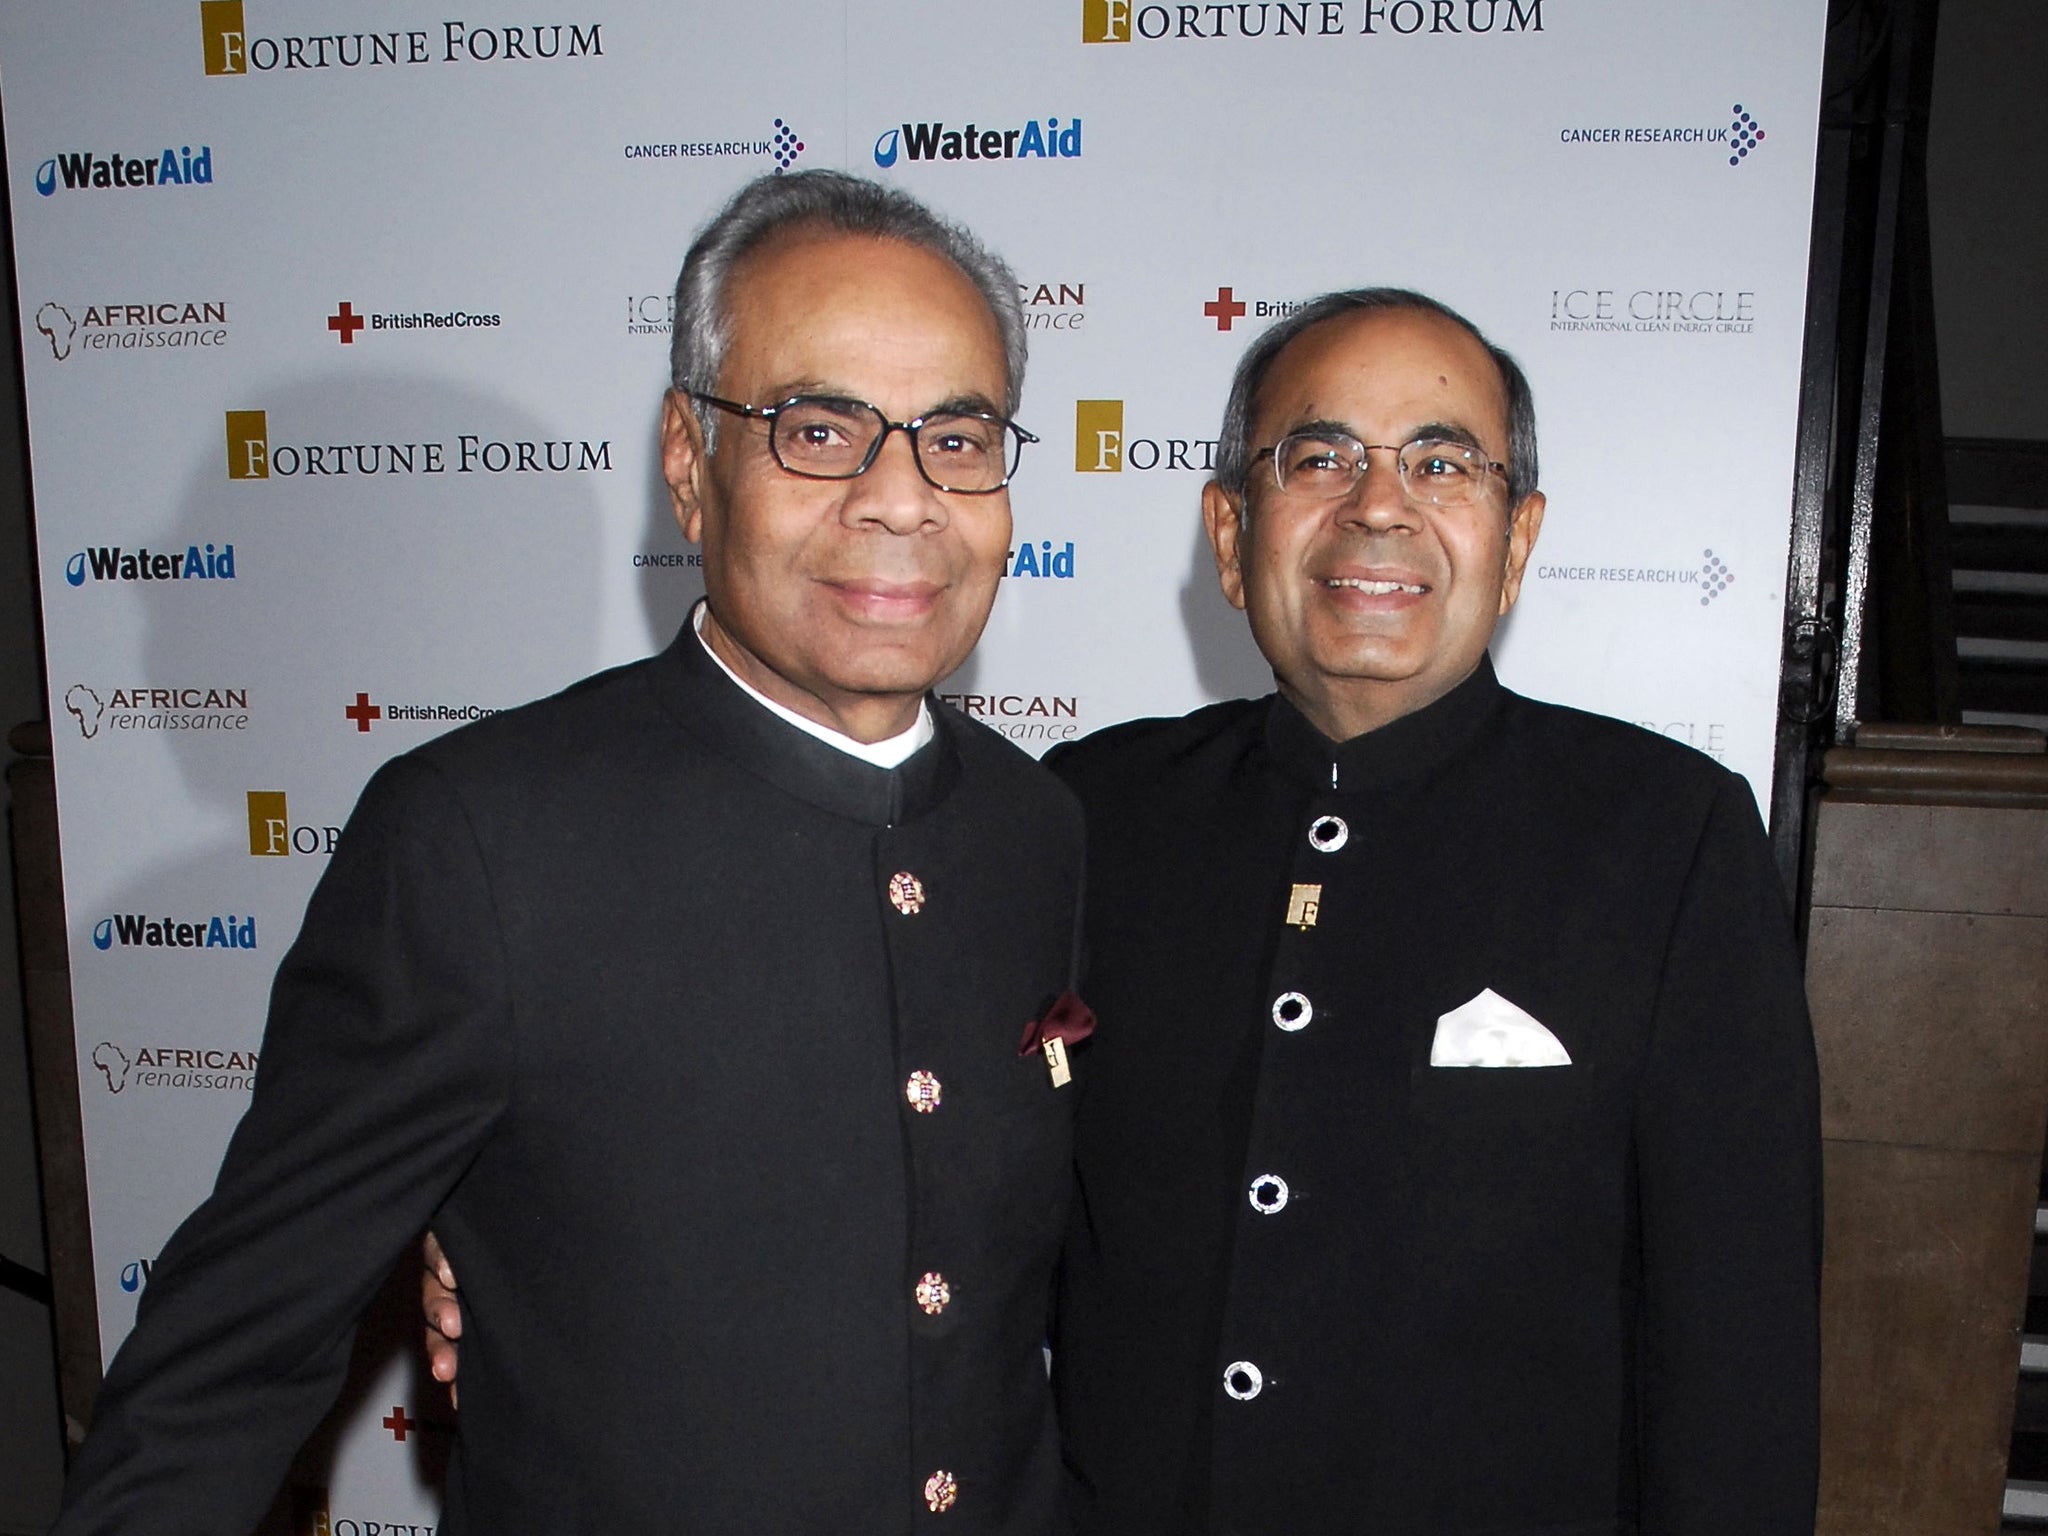 The Hinduja brothers are worth a combined total of £11.9bn